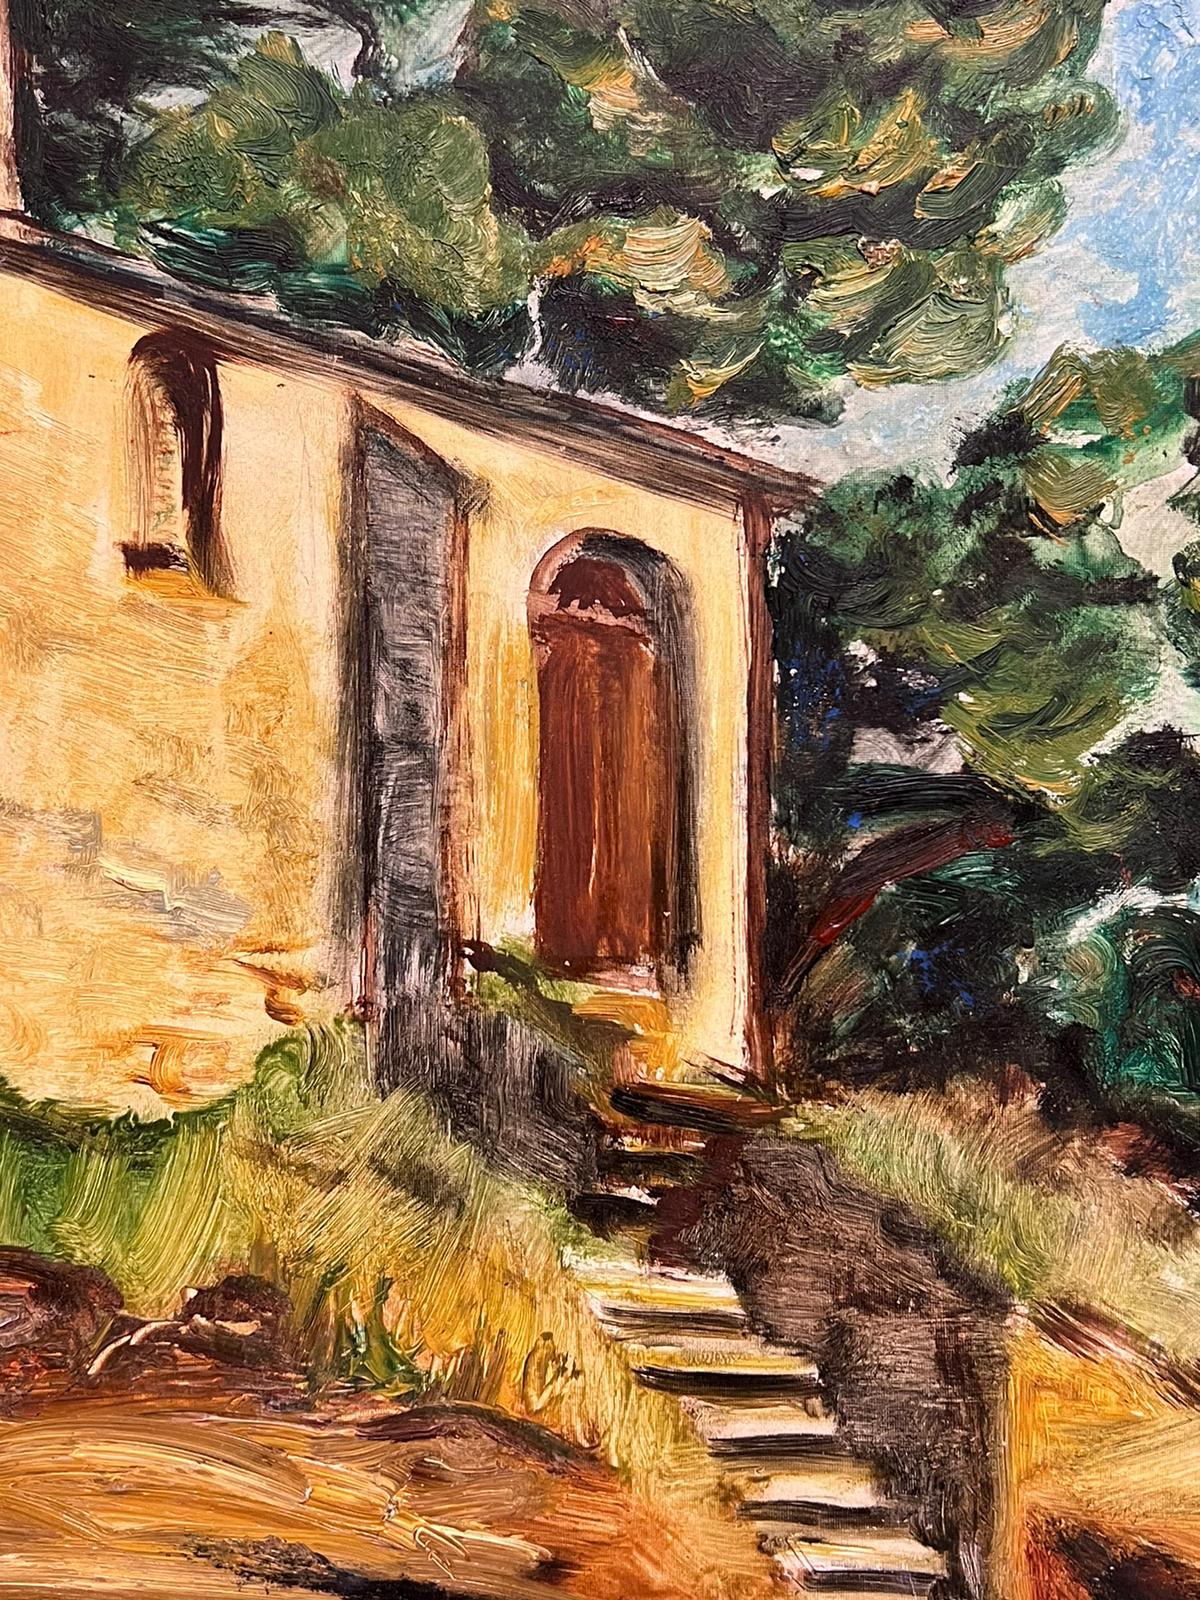 Provence
French School, mid 20th century
oil on board, unframed
board: 21.5 x 25.5 inches
provenance: private collection
condition: a few surface scuffs, but in good and sound condition 